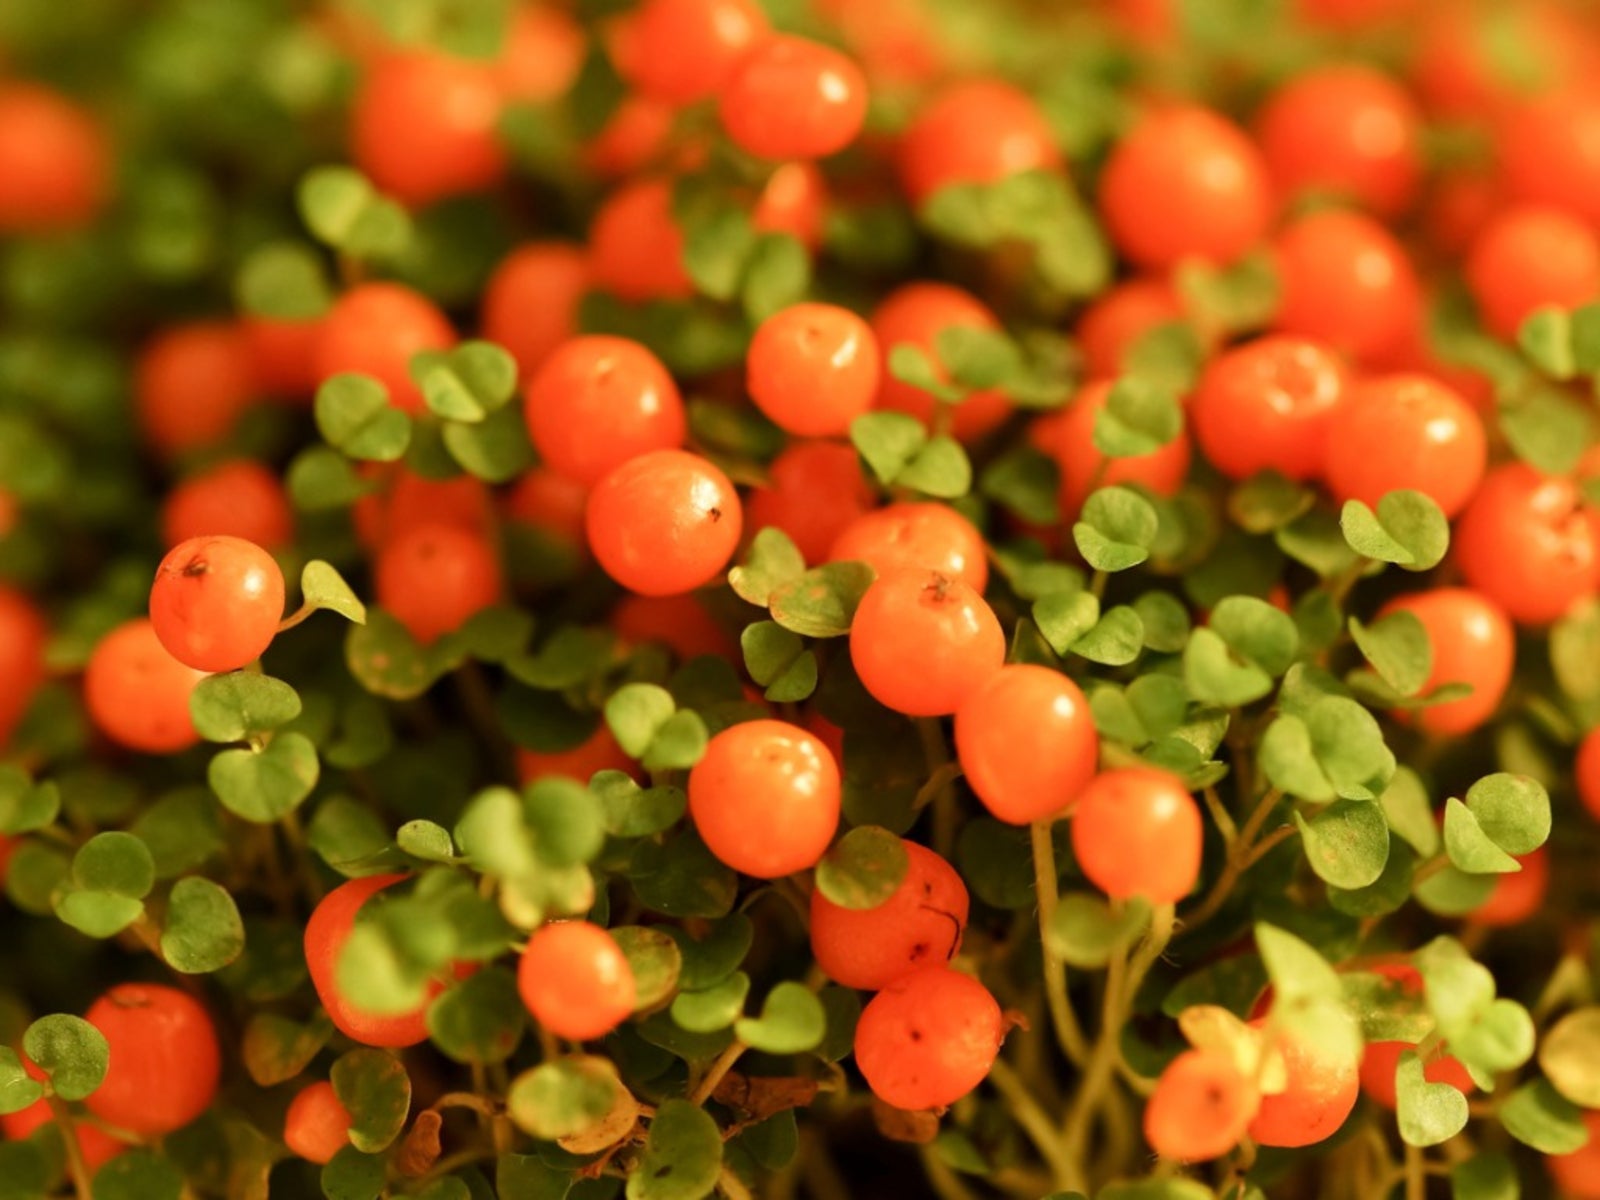 Coral Bead Plant - Learn About Growing Coral Bead Plants